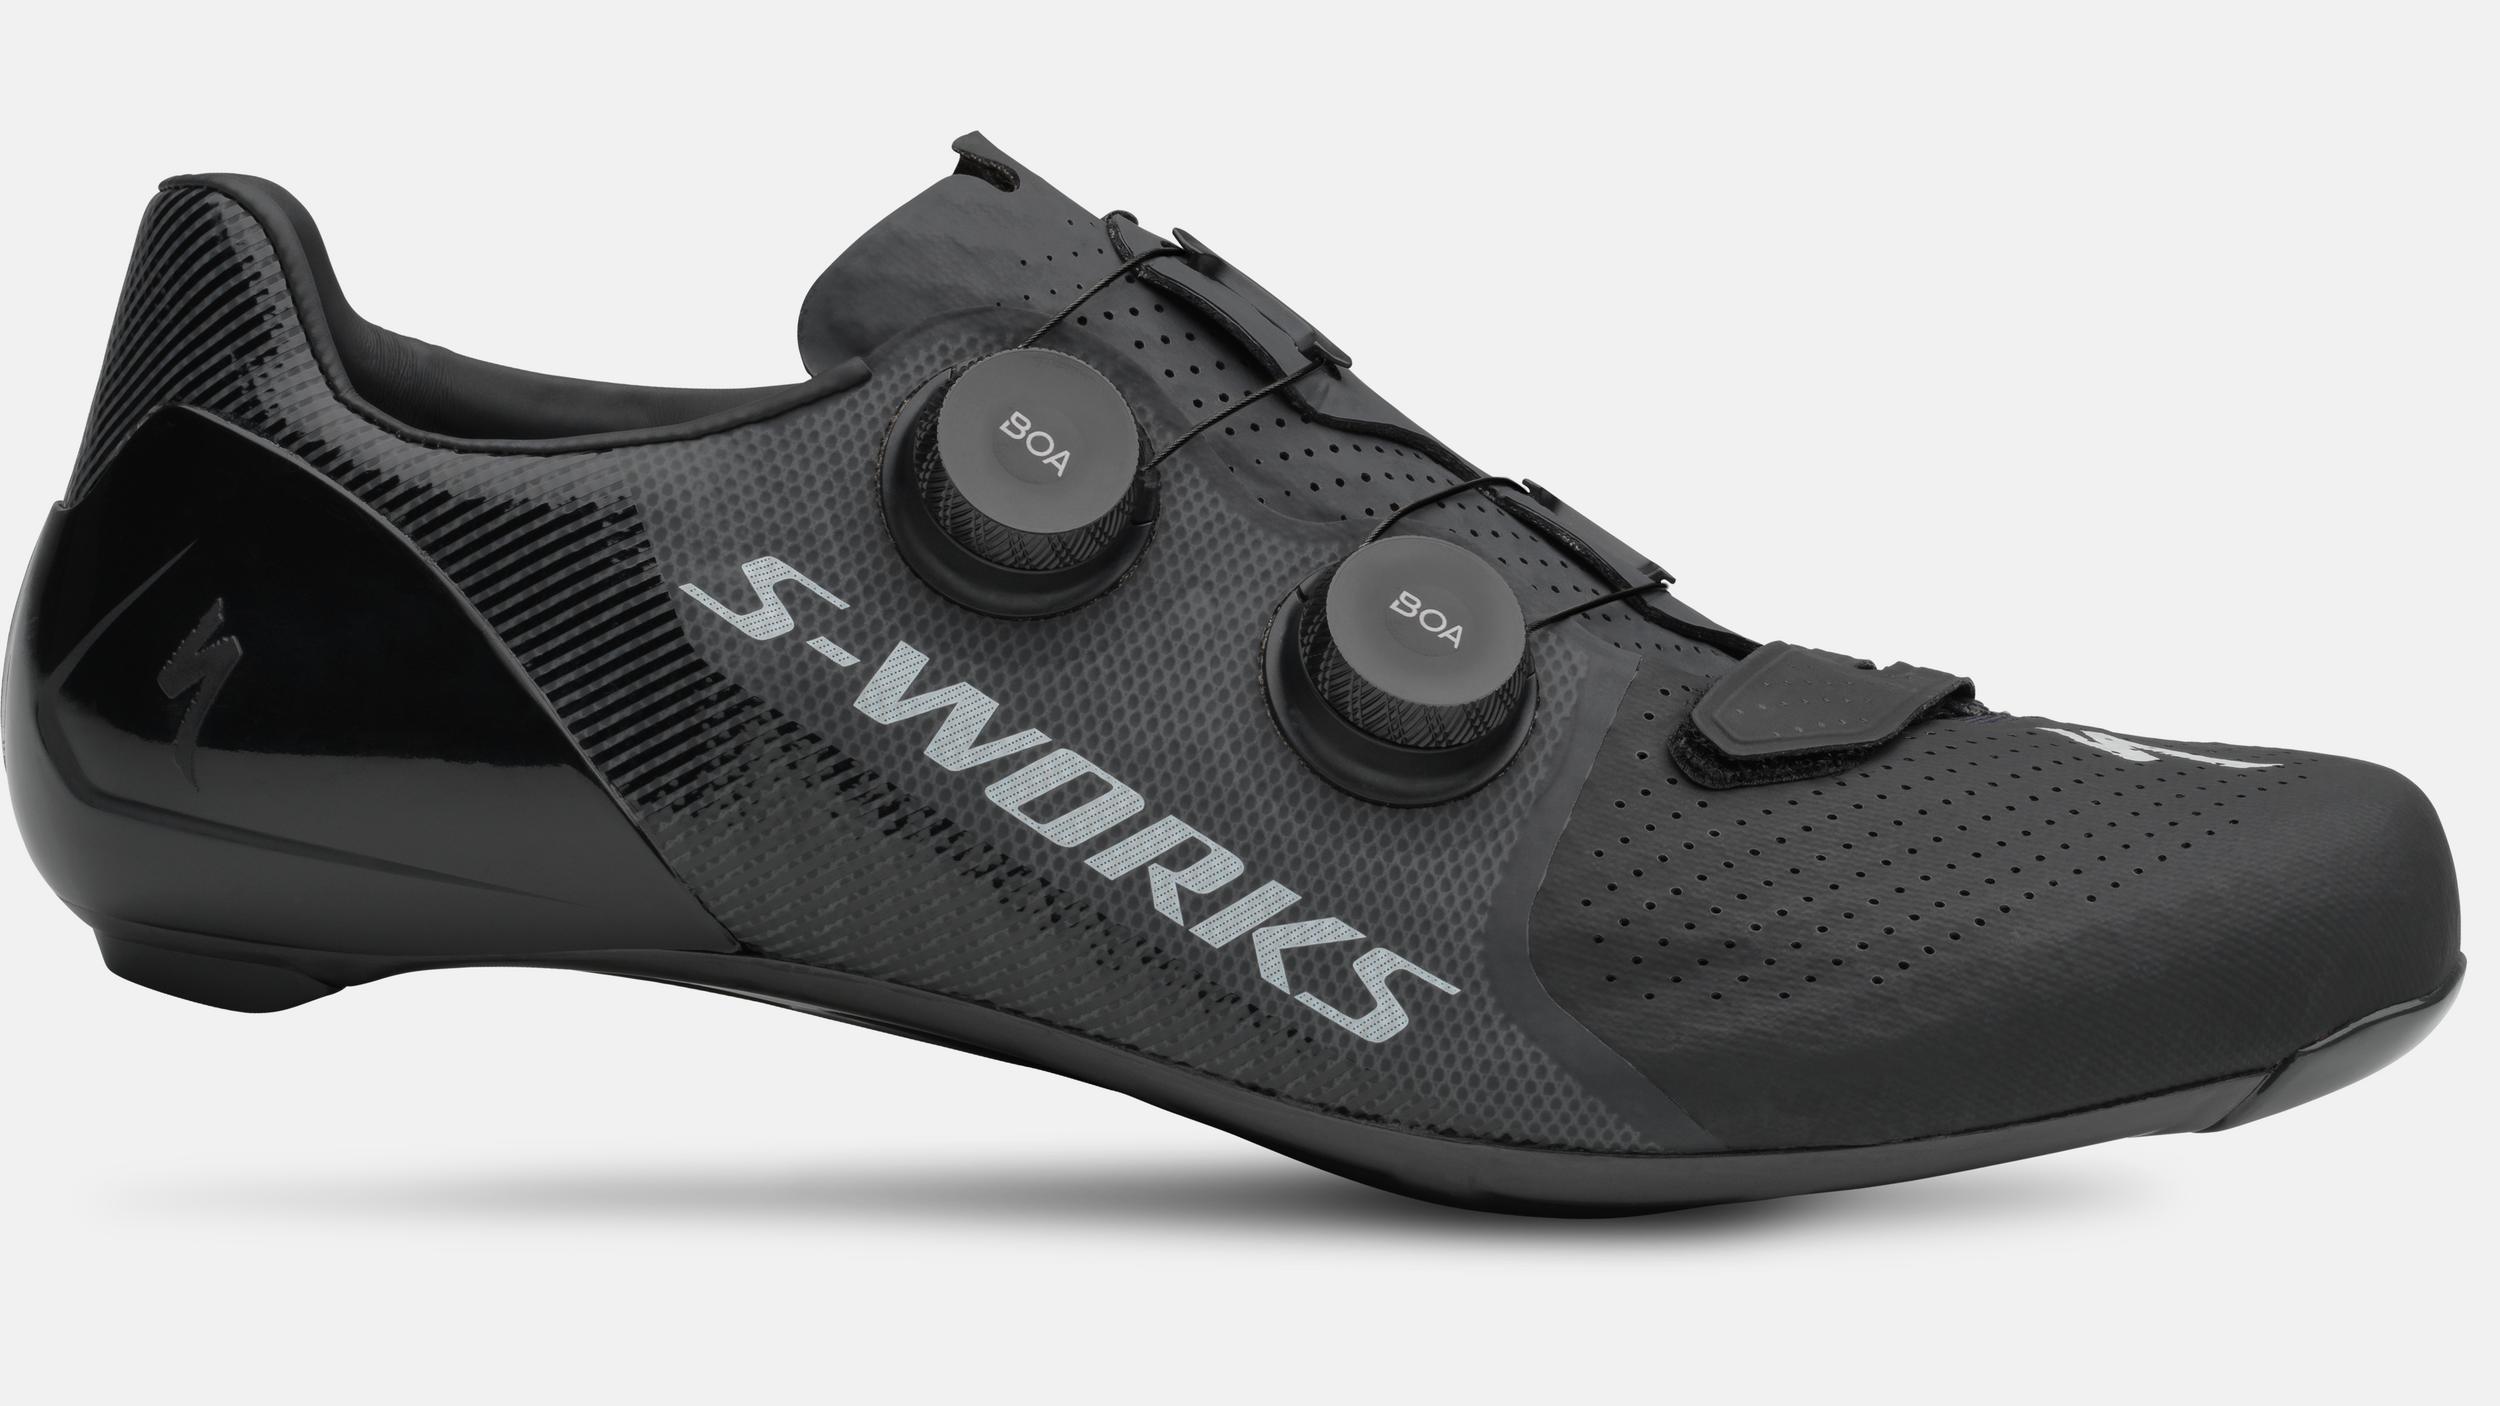 7 Road Shoes Specialized.com